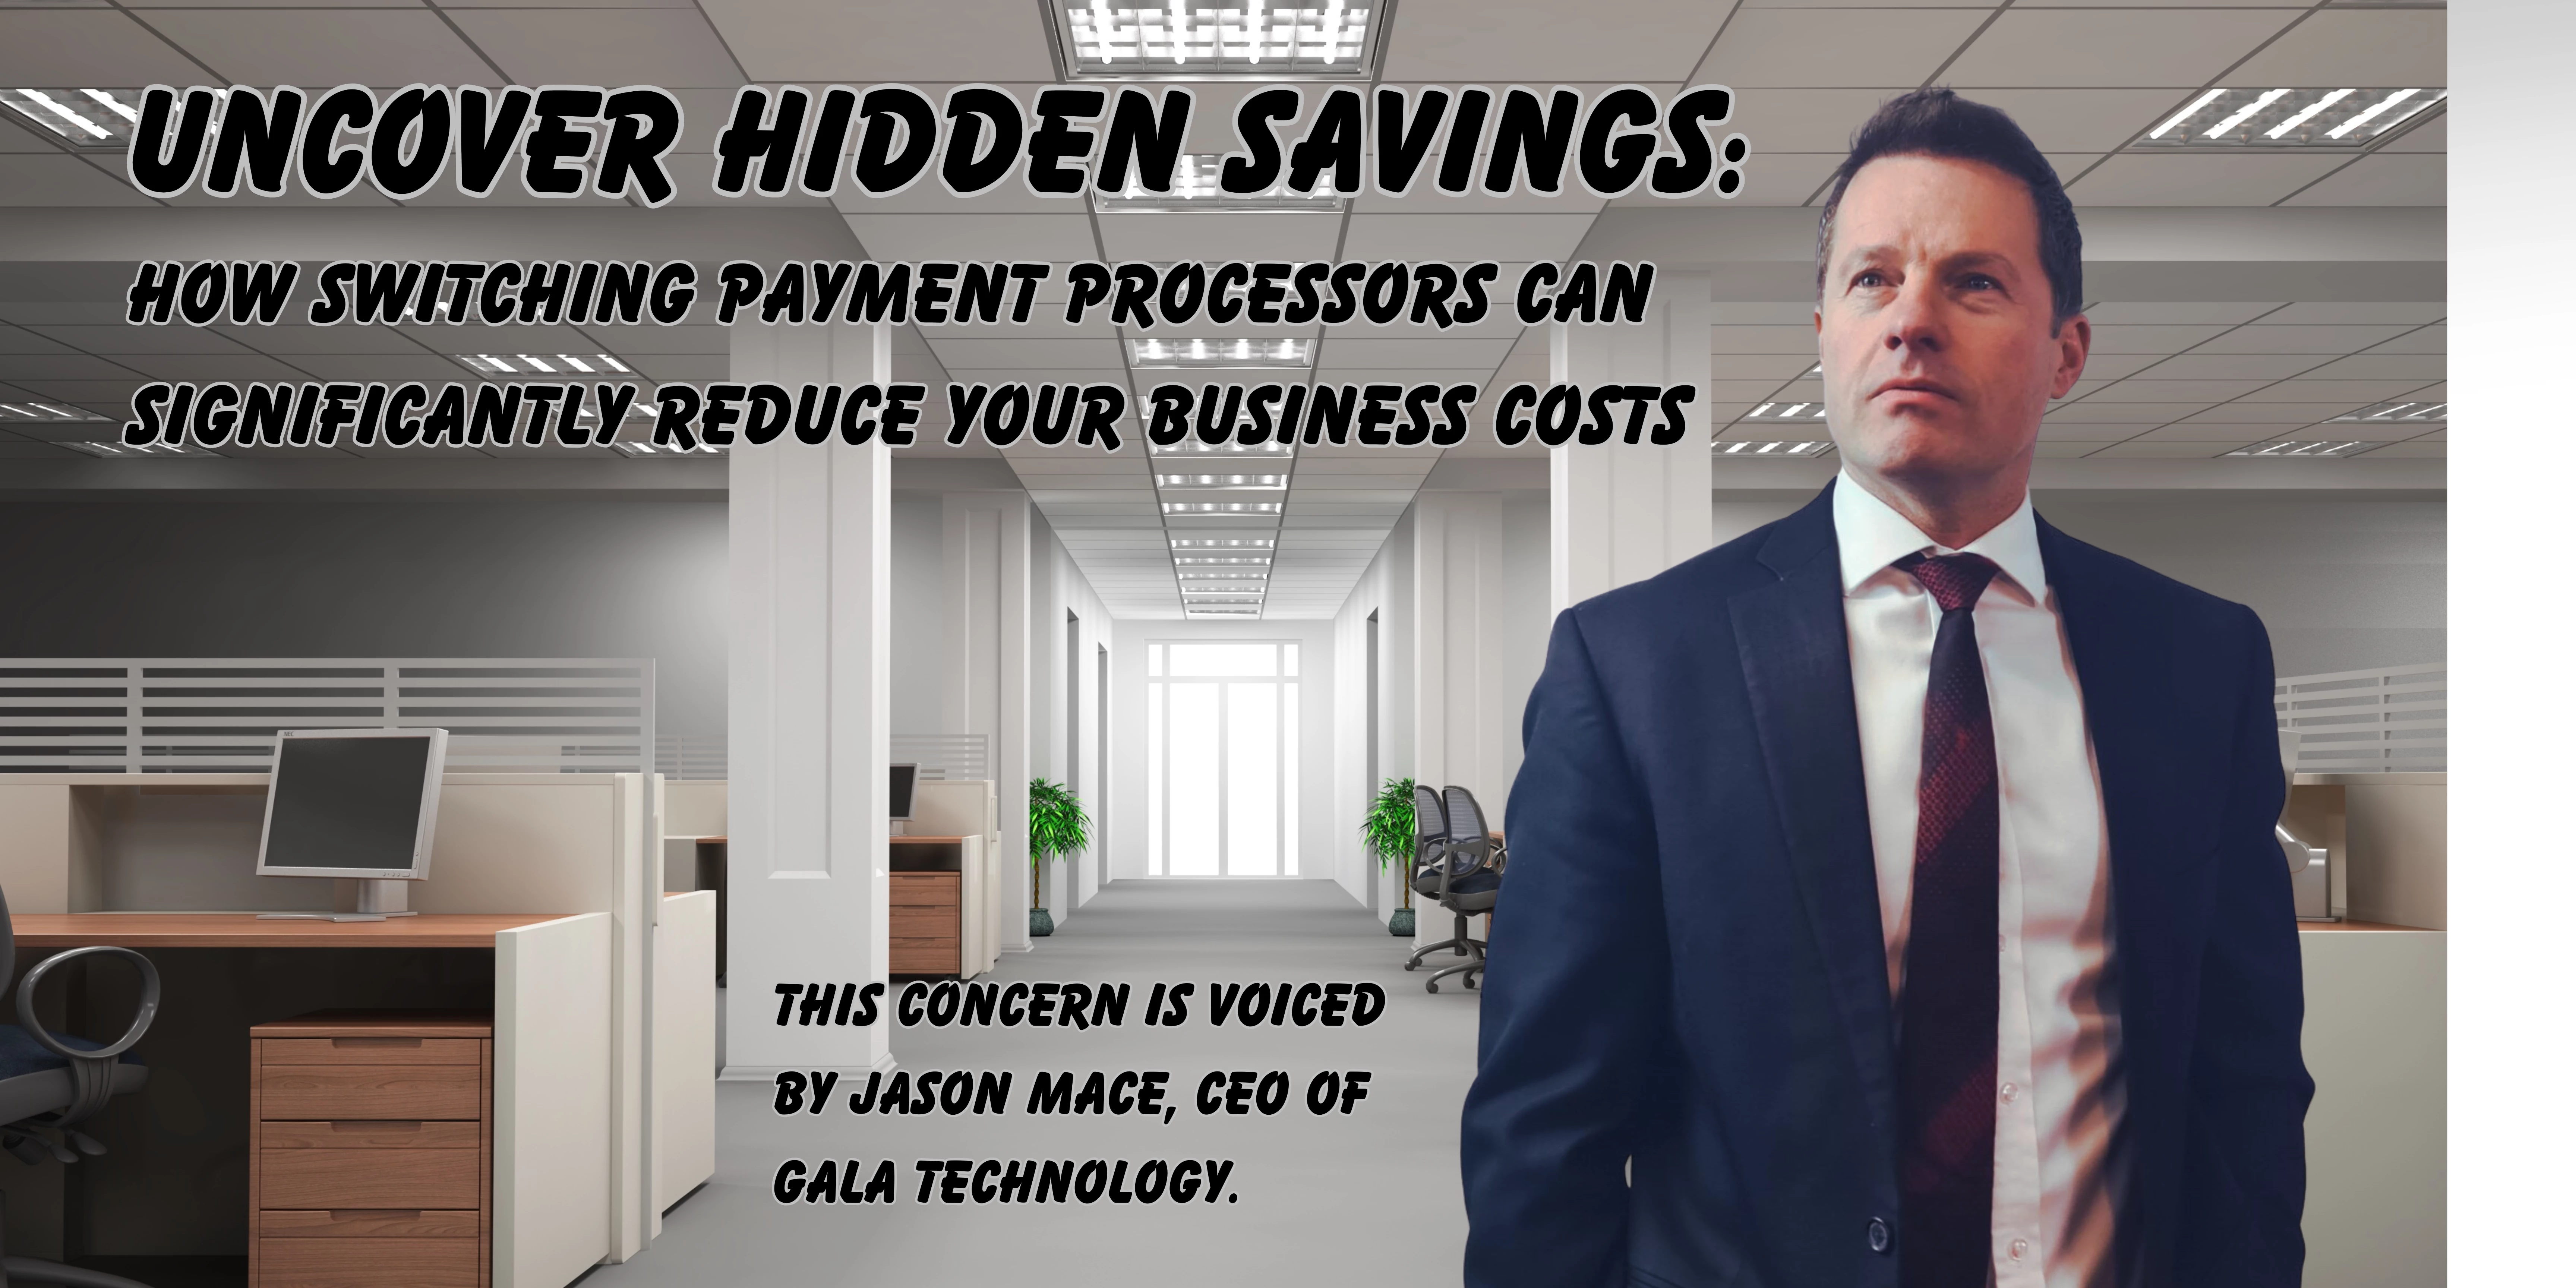 Don't Let Hidden Fees Nibble At Your Profits: Gala Technology Reveals the Way to Stellar Savings!